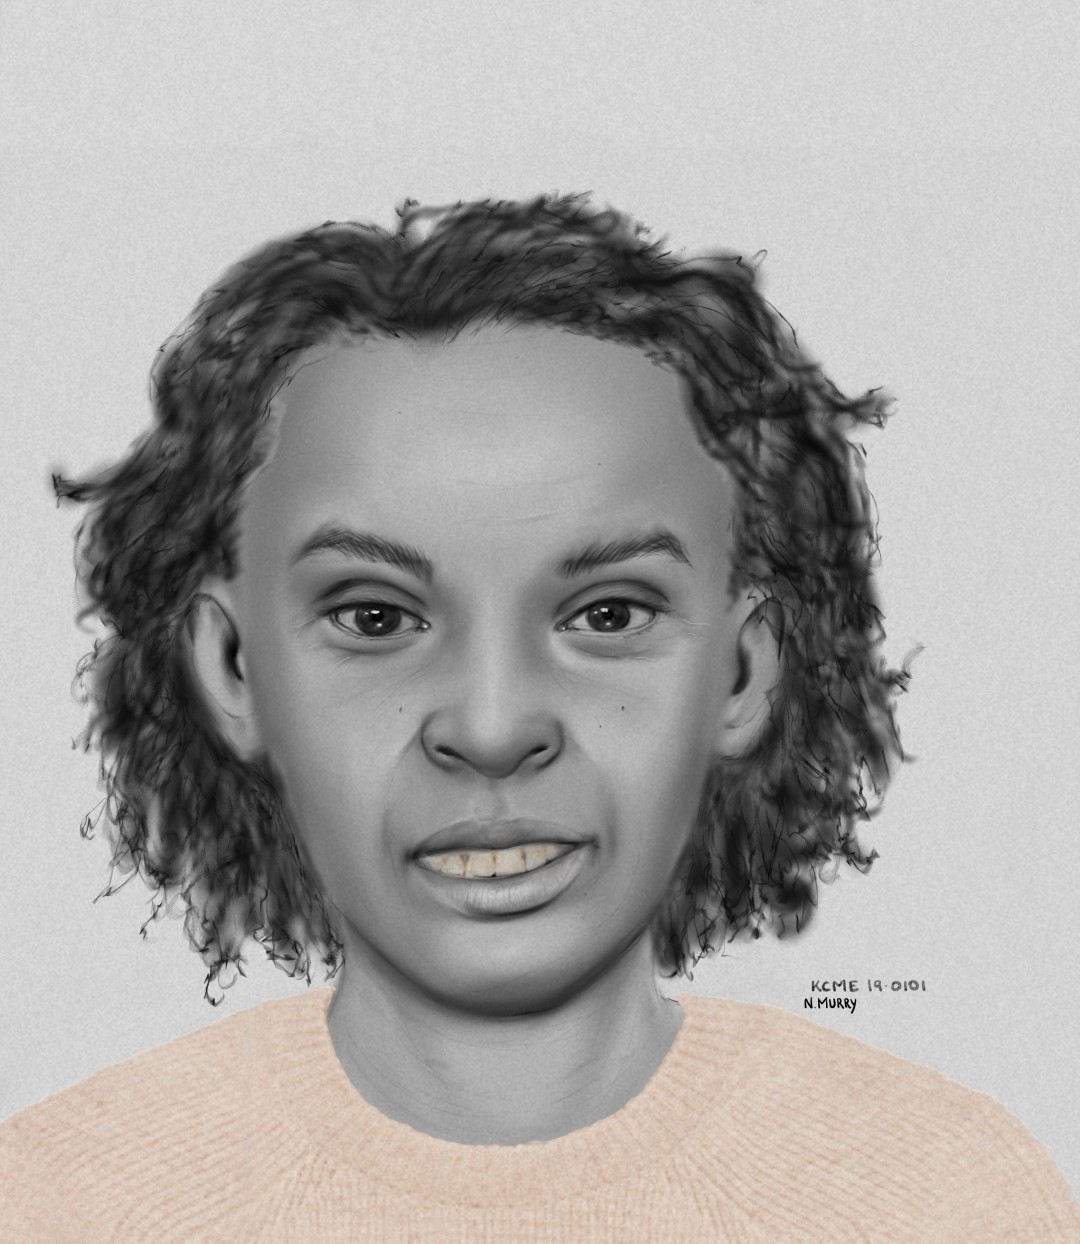 Unidentified remains, Case #19-0101: Adult, mixed race female found in the 700 block of 1st St., Kirkland, WA